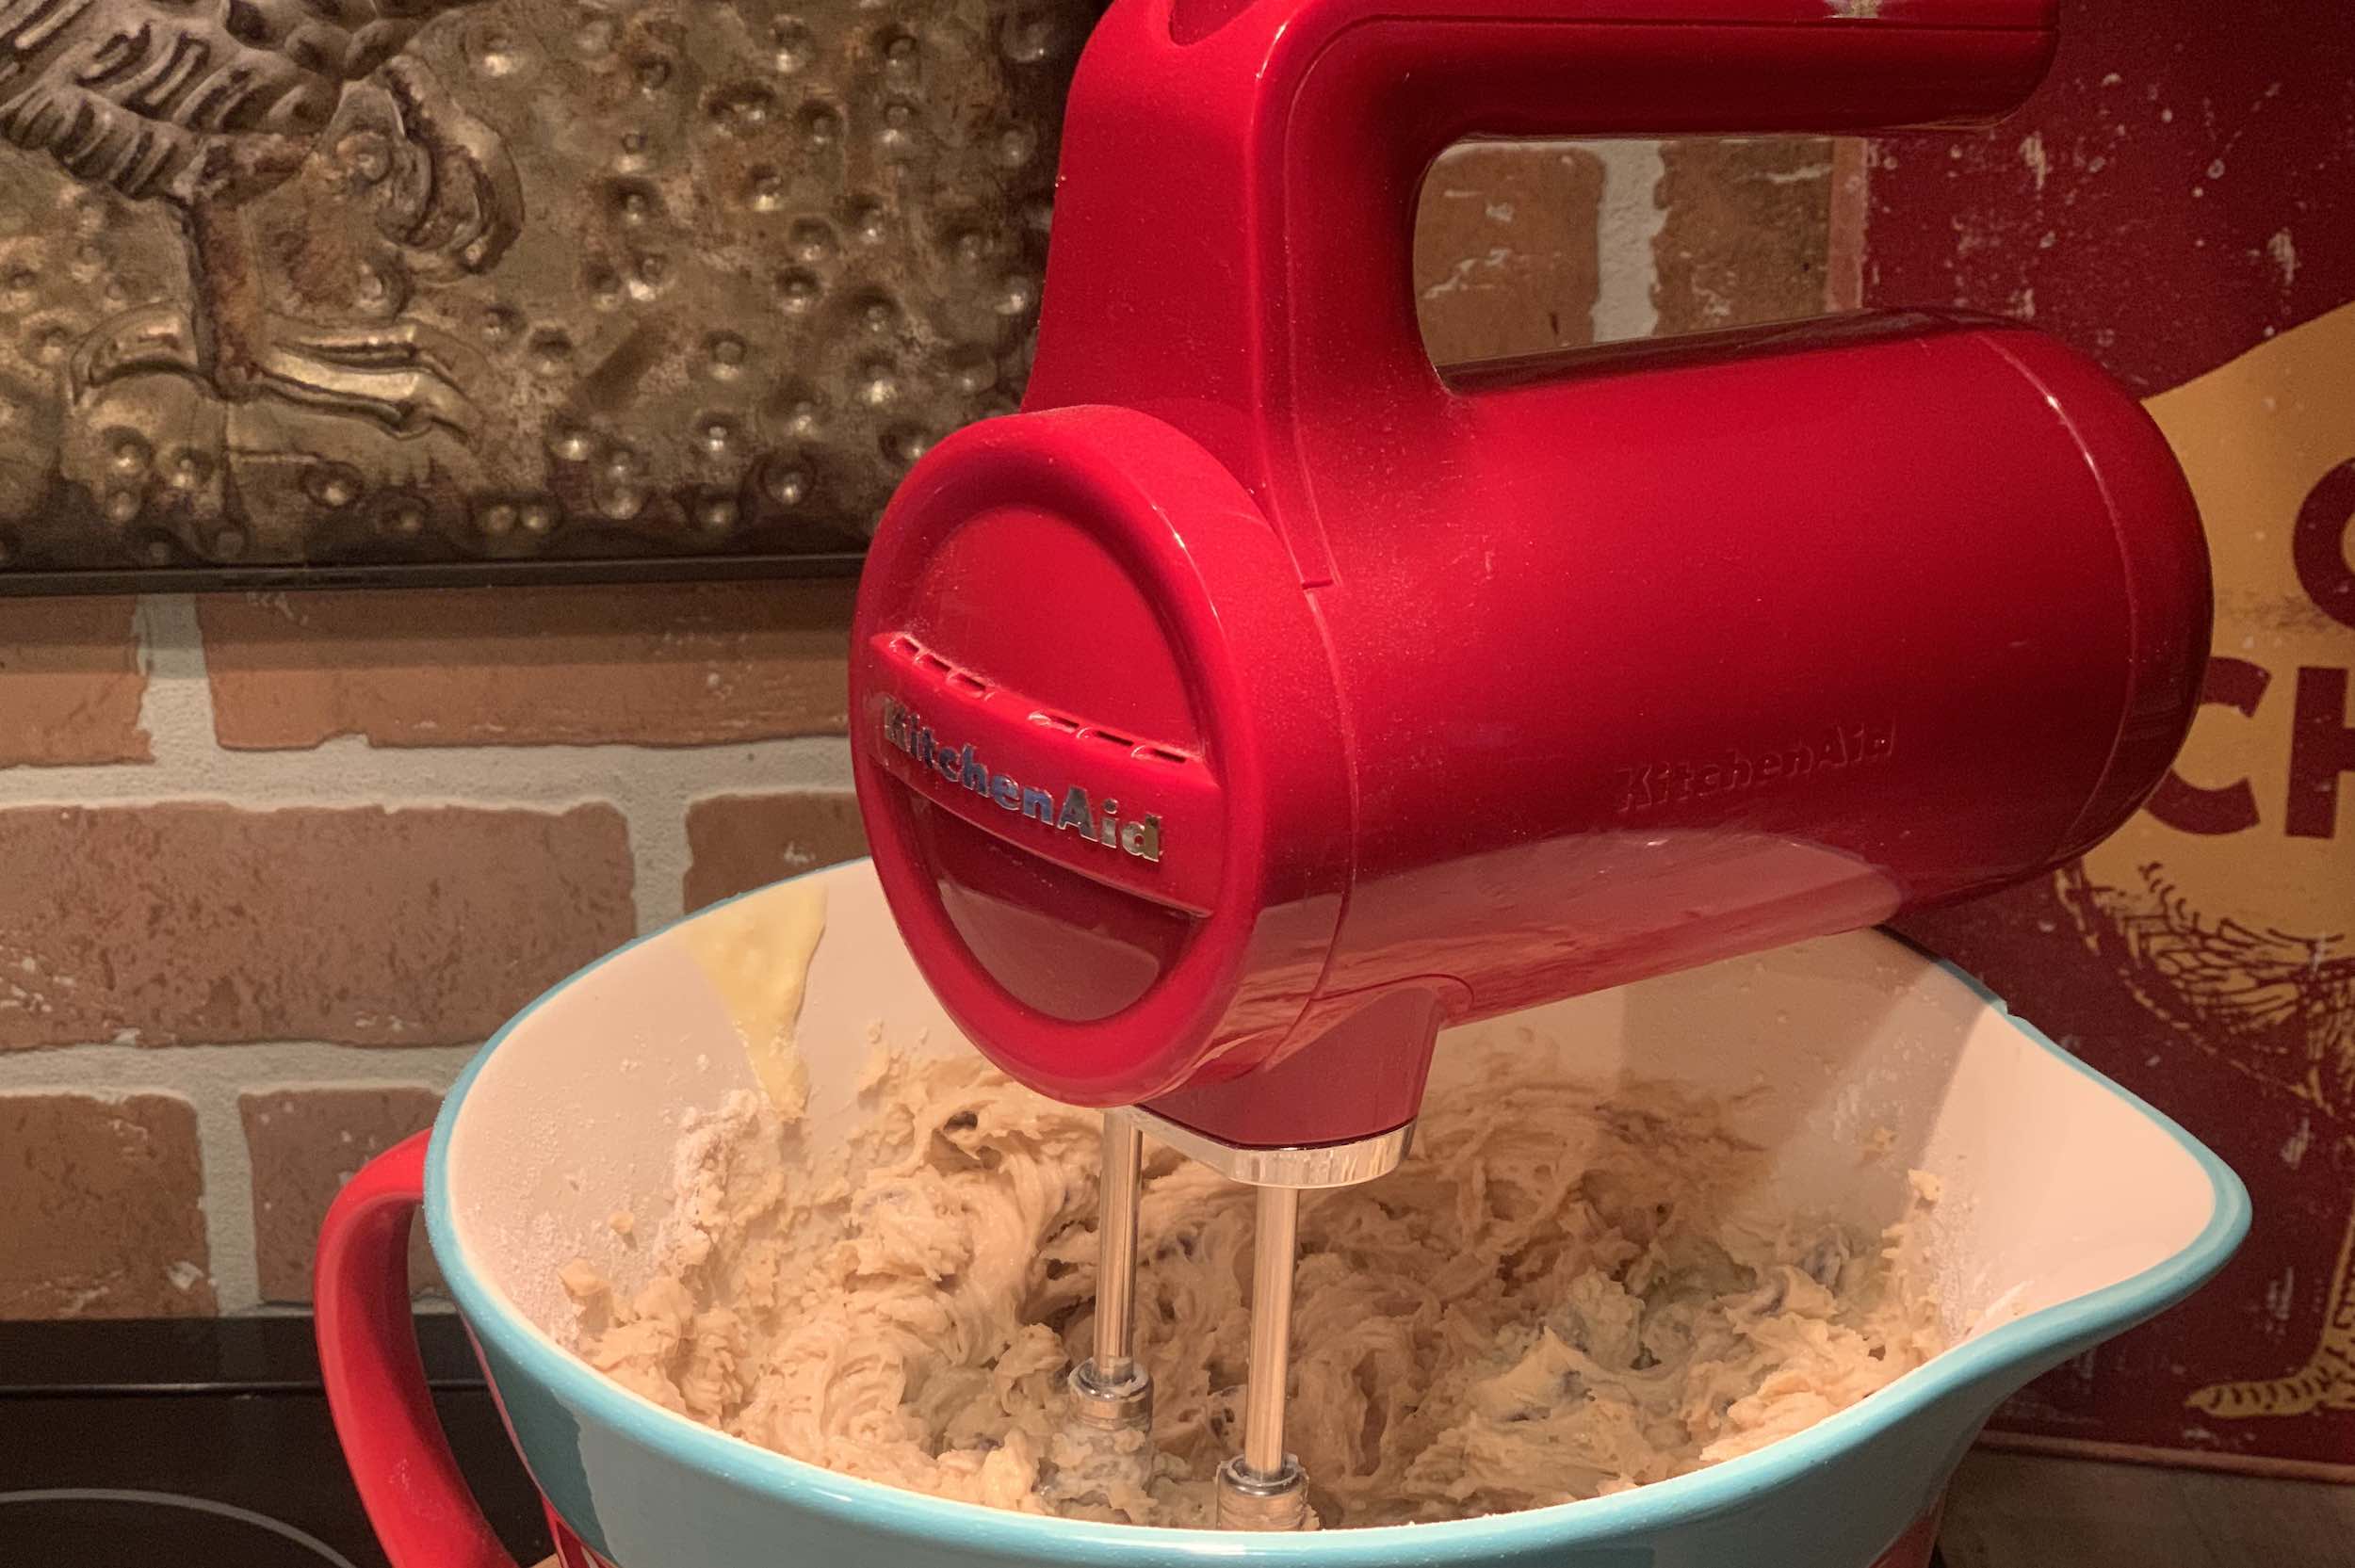 KitchenAid cordless 7 speed hand mixer review | Best Buy Blog